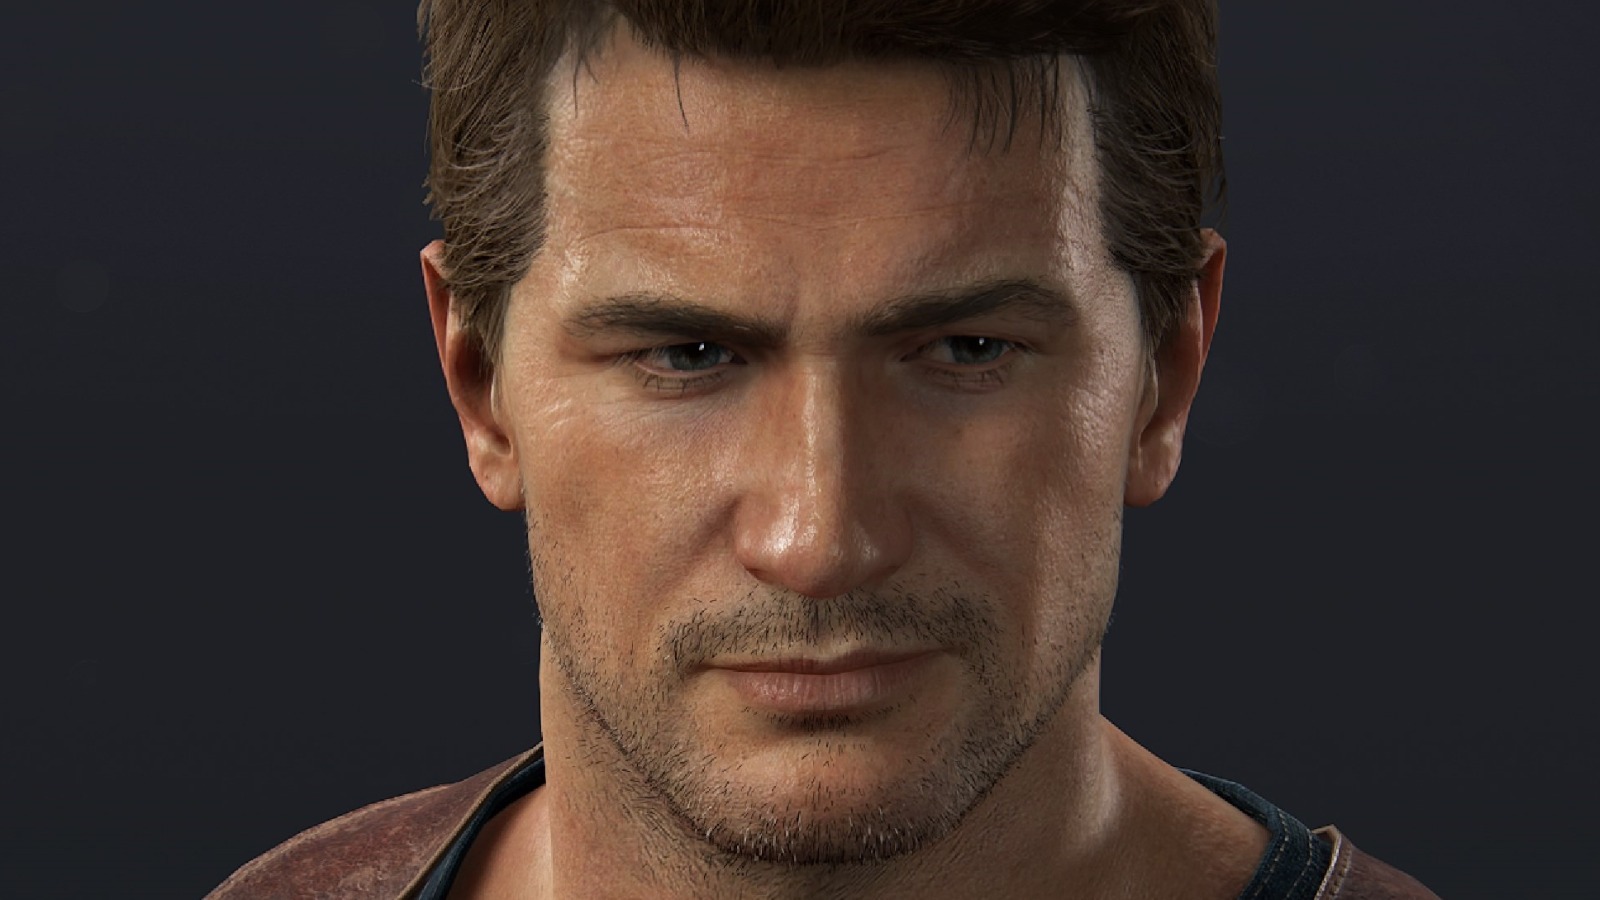 Uncharted 5' on PS5: 3 ways Naughty Dog could continue the franchise